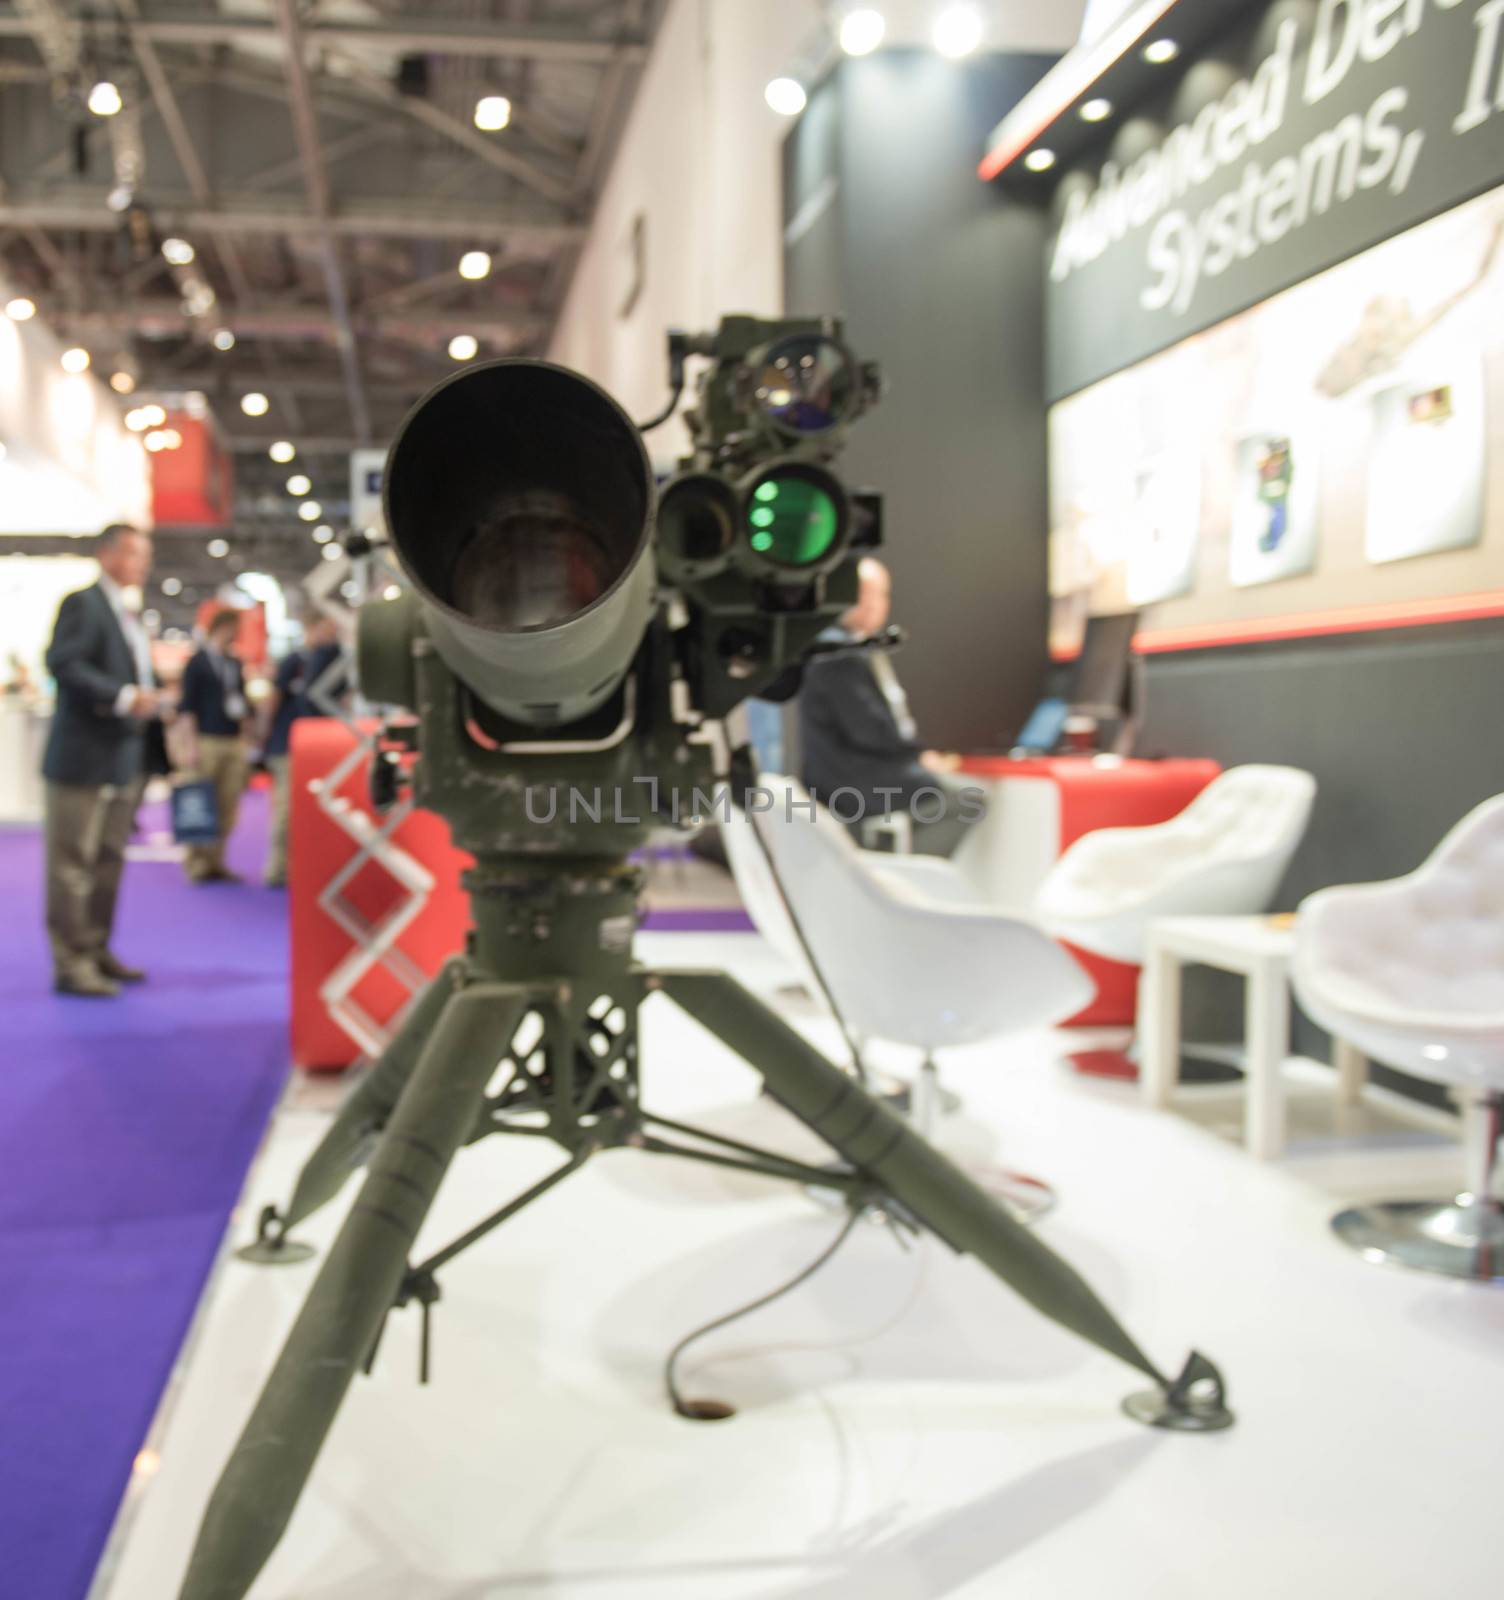 UNITED KINGDOM, London: 	The Defence and Security International Exhibition (DSEI) began in London on September 15, 2015 despite a week of direct action protests by peace campaigners.  	The arms fair has seen over 30,000 people descend on London to see the 1,500 exhibitors who are displaying weapons of war from pistols and rifles up to tanks, assault helicopters and warships.  	Protesters attempted to block the main road into the exhibition, claiming that such an event strengthened the UK's ties to human rights abuses. 